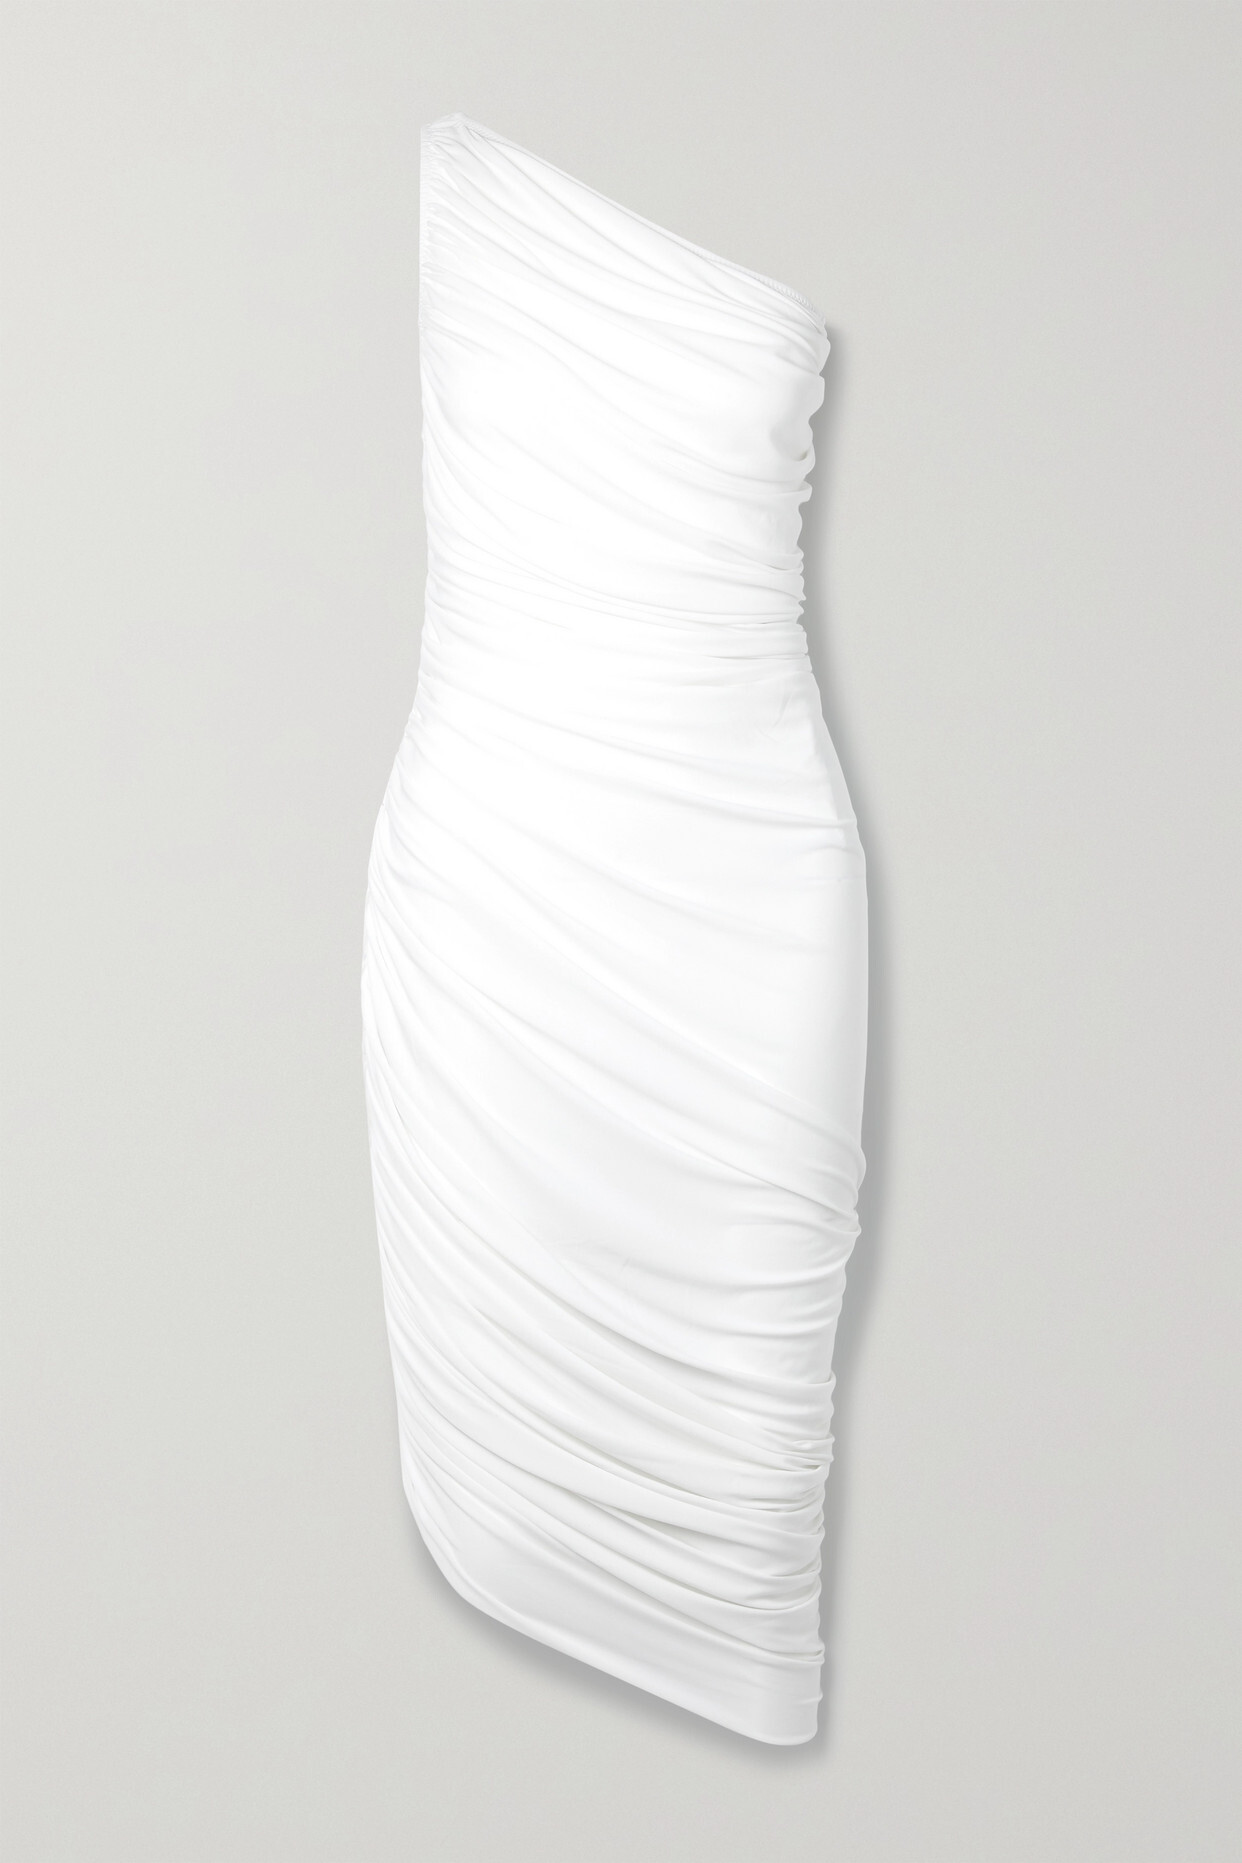 Norma Kamali - Diana One-shoulder Ruched Stretch-jersey Dress - White